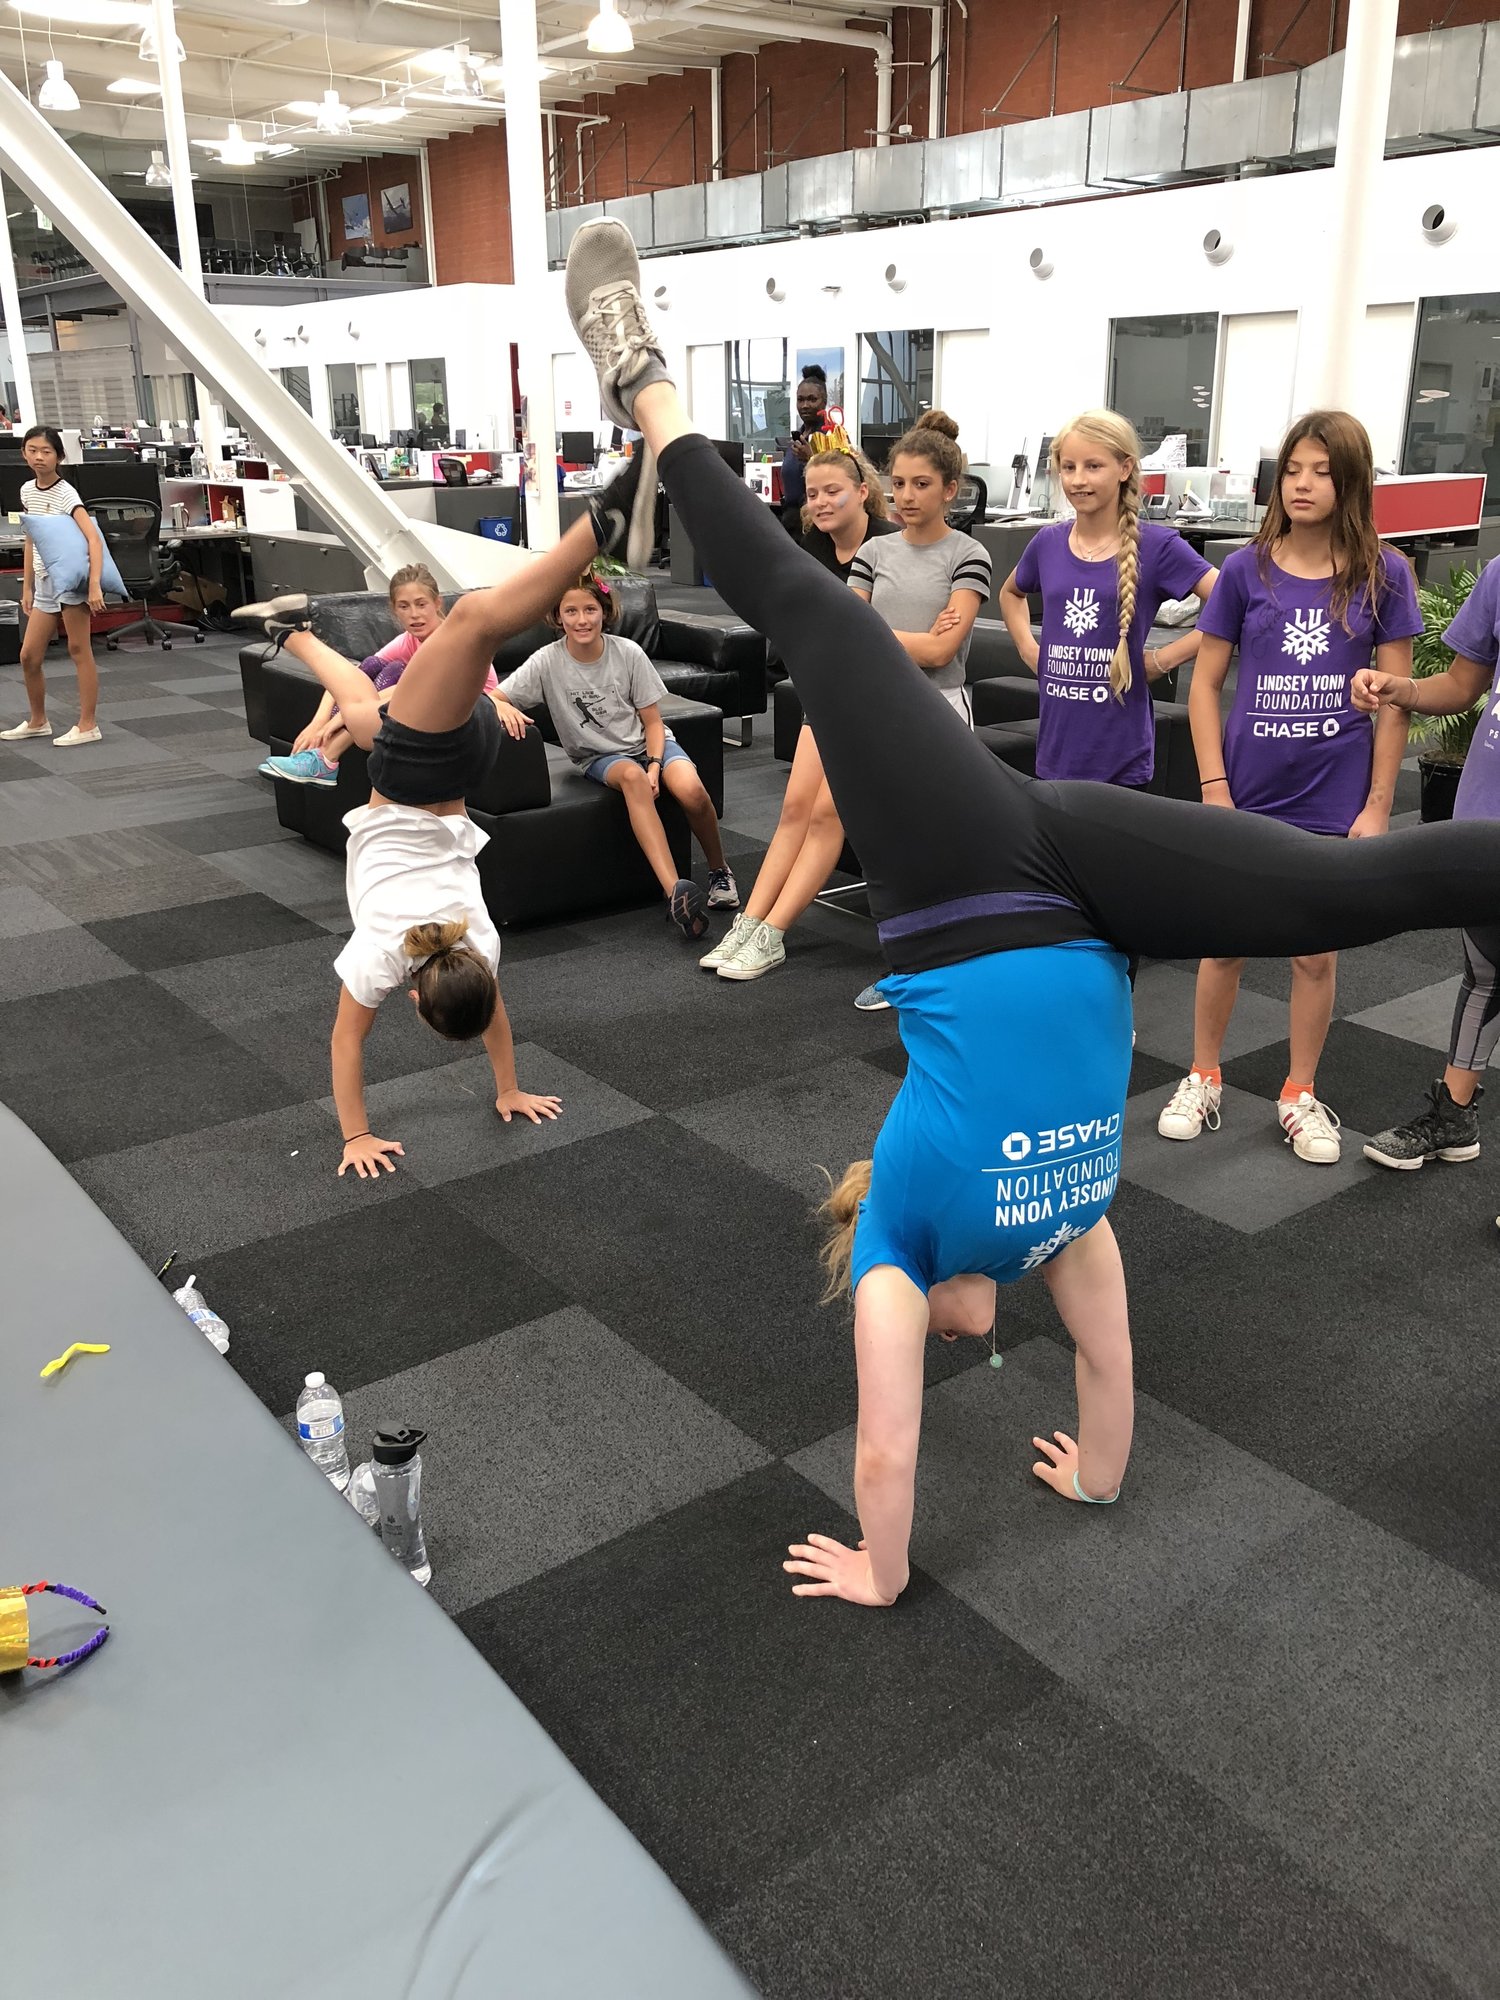  Camper/mentor handstand contest. An average activity at an all girls athlete camp.&nbsp; 